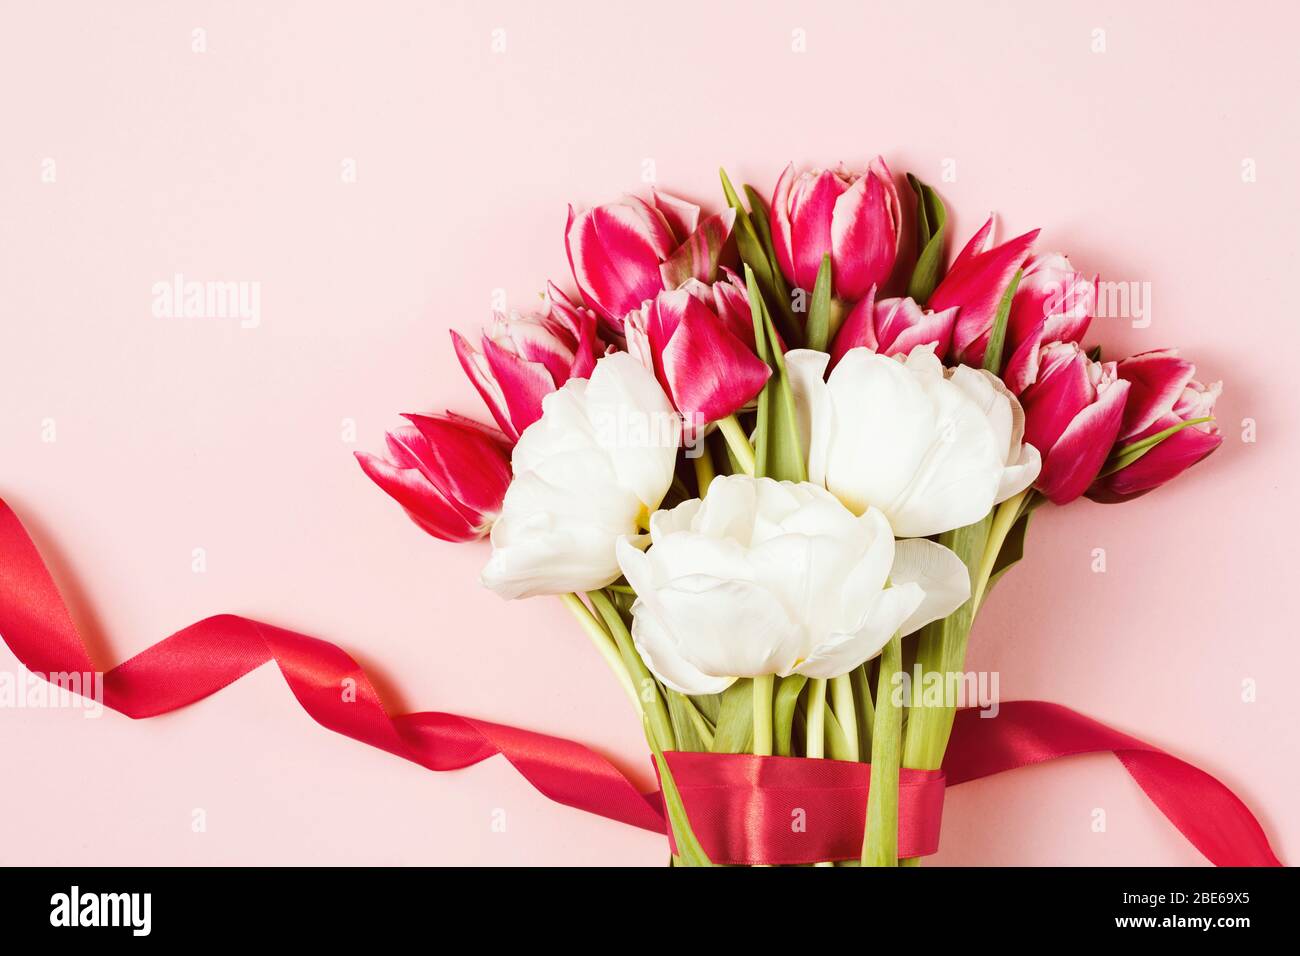 Bunch of pink and white peony tulips tied with a red ribbon on pinkish background. Mother's and Women's dan concept. Top view, copy space Stock Photo